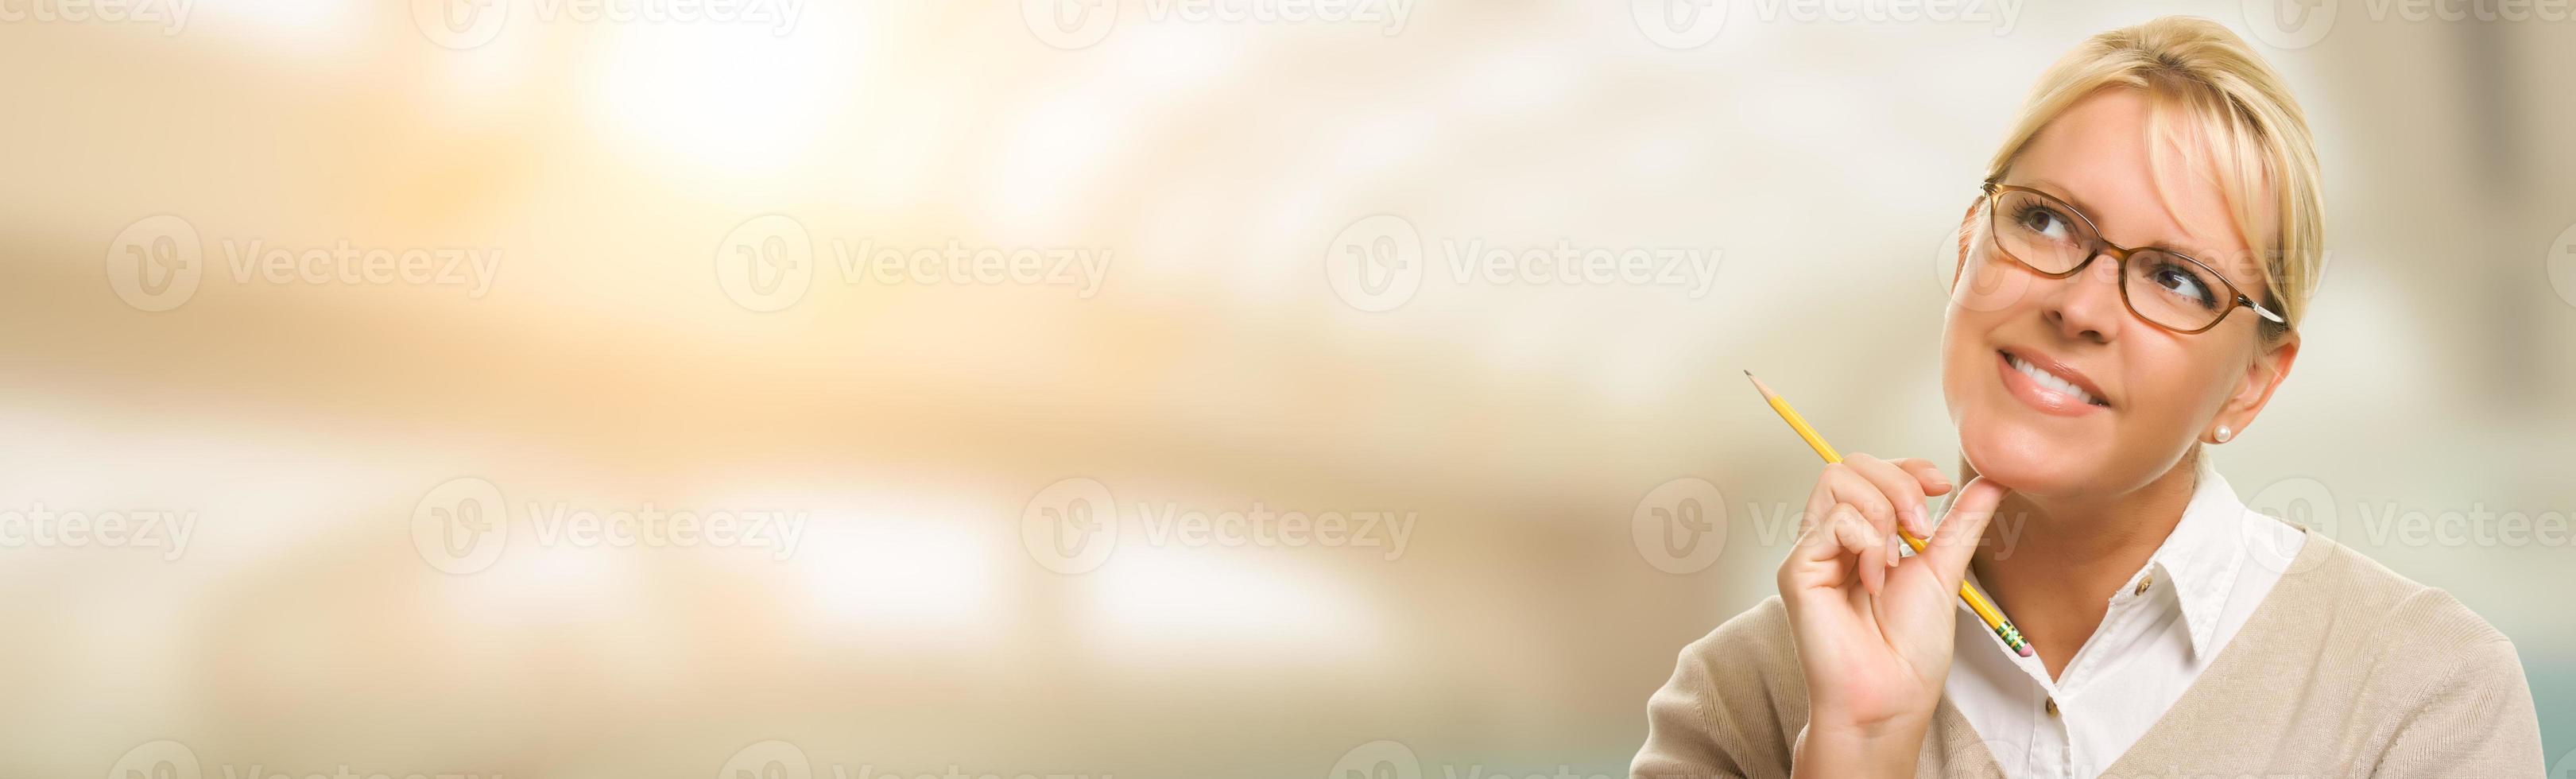 Contemplative Young Adult Woman Looking Off To The Side Wide Banner with Room For Text. photo